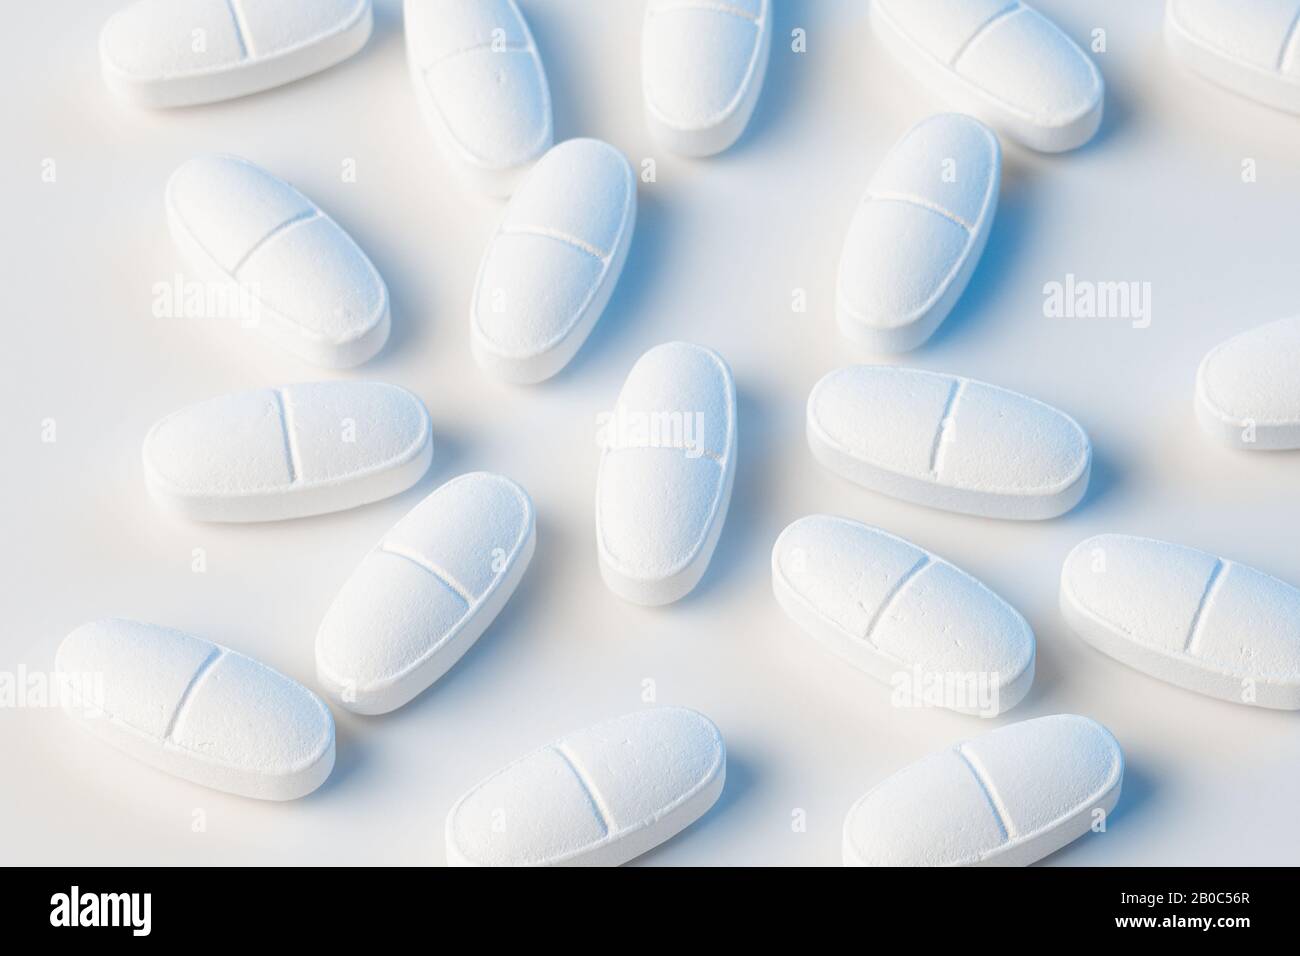 white pills on white background with blue lights Stock Photo